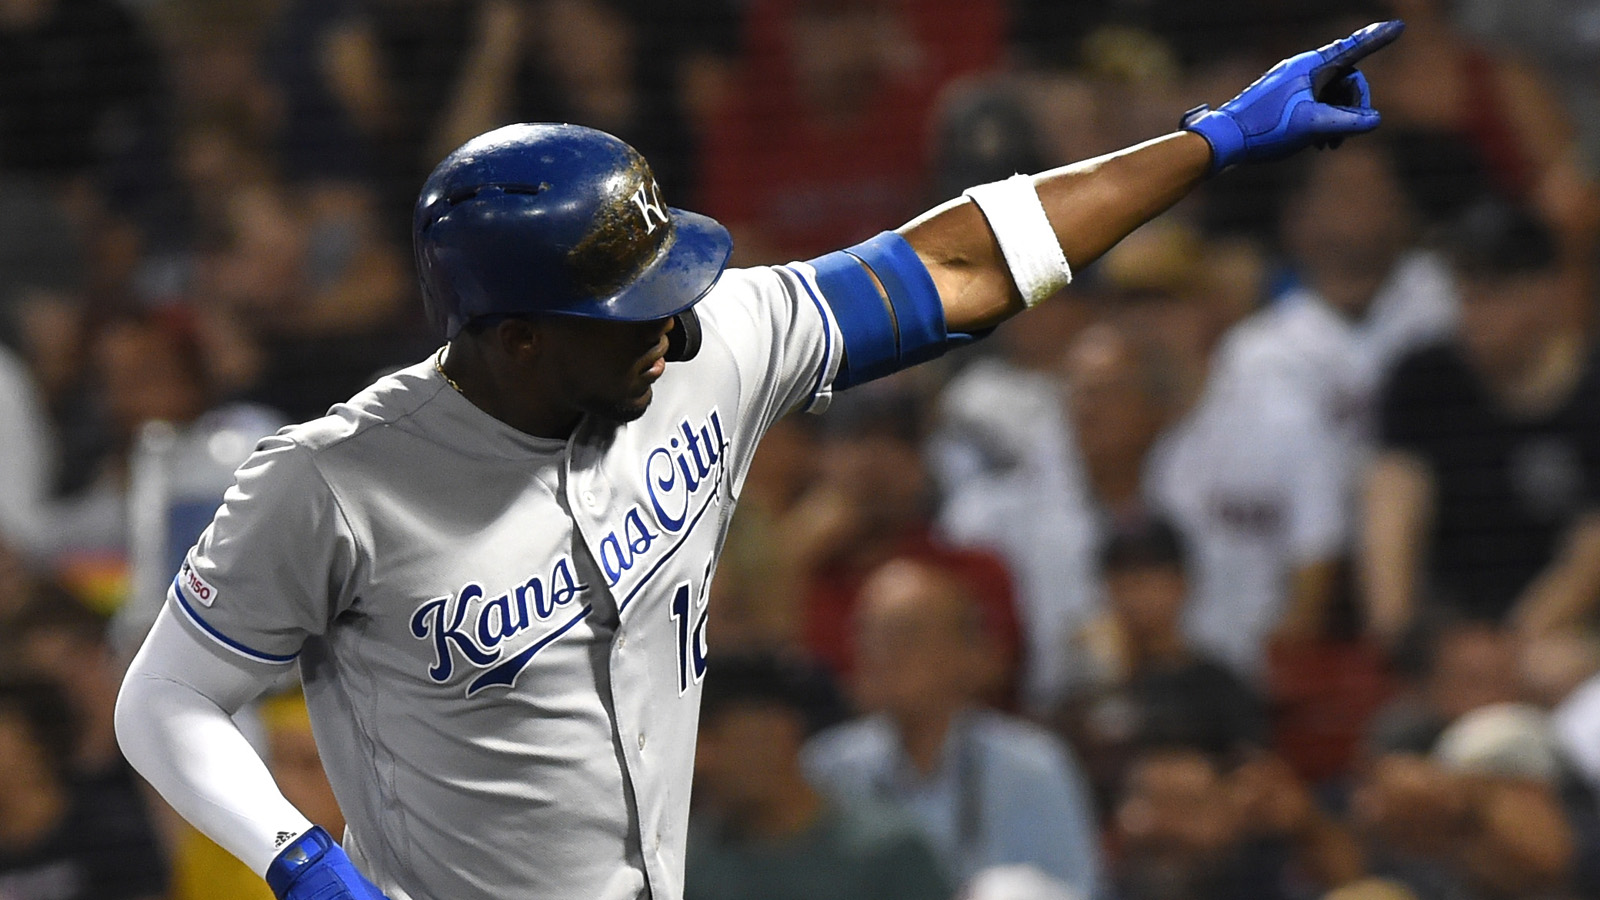 Soler's offensive barrage earns him AL Player of the Week honors